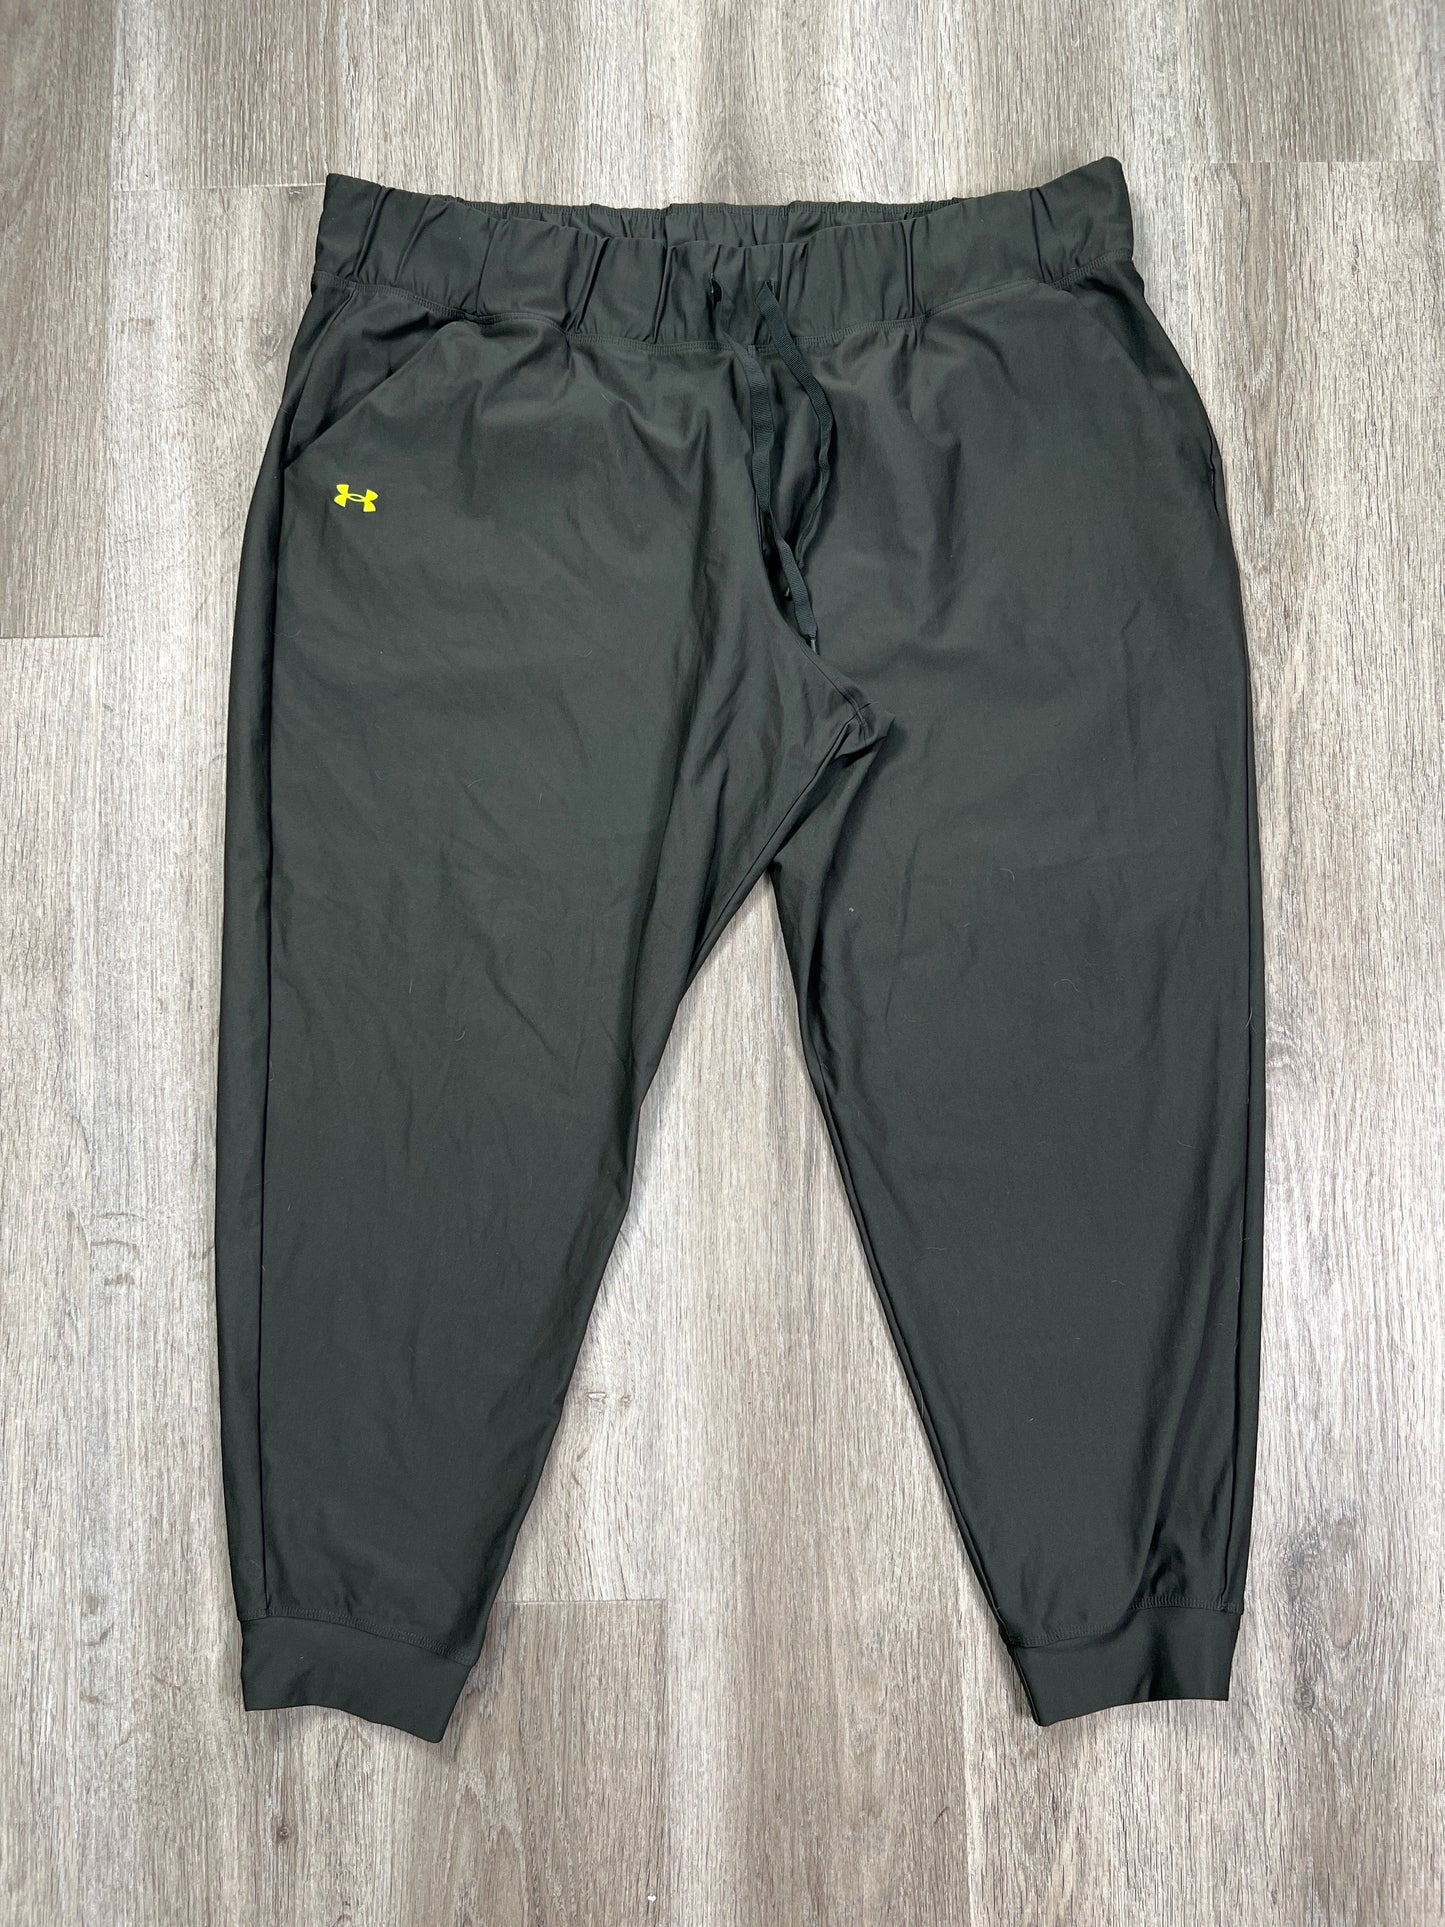 Green Athletic Pants Under Armour, Size 1x